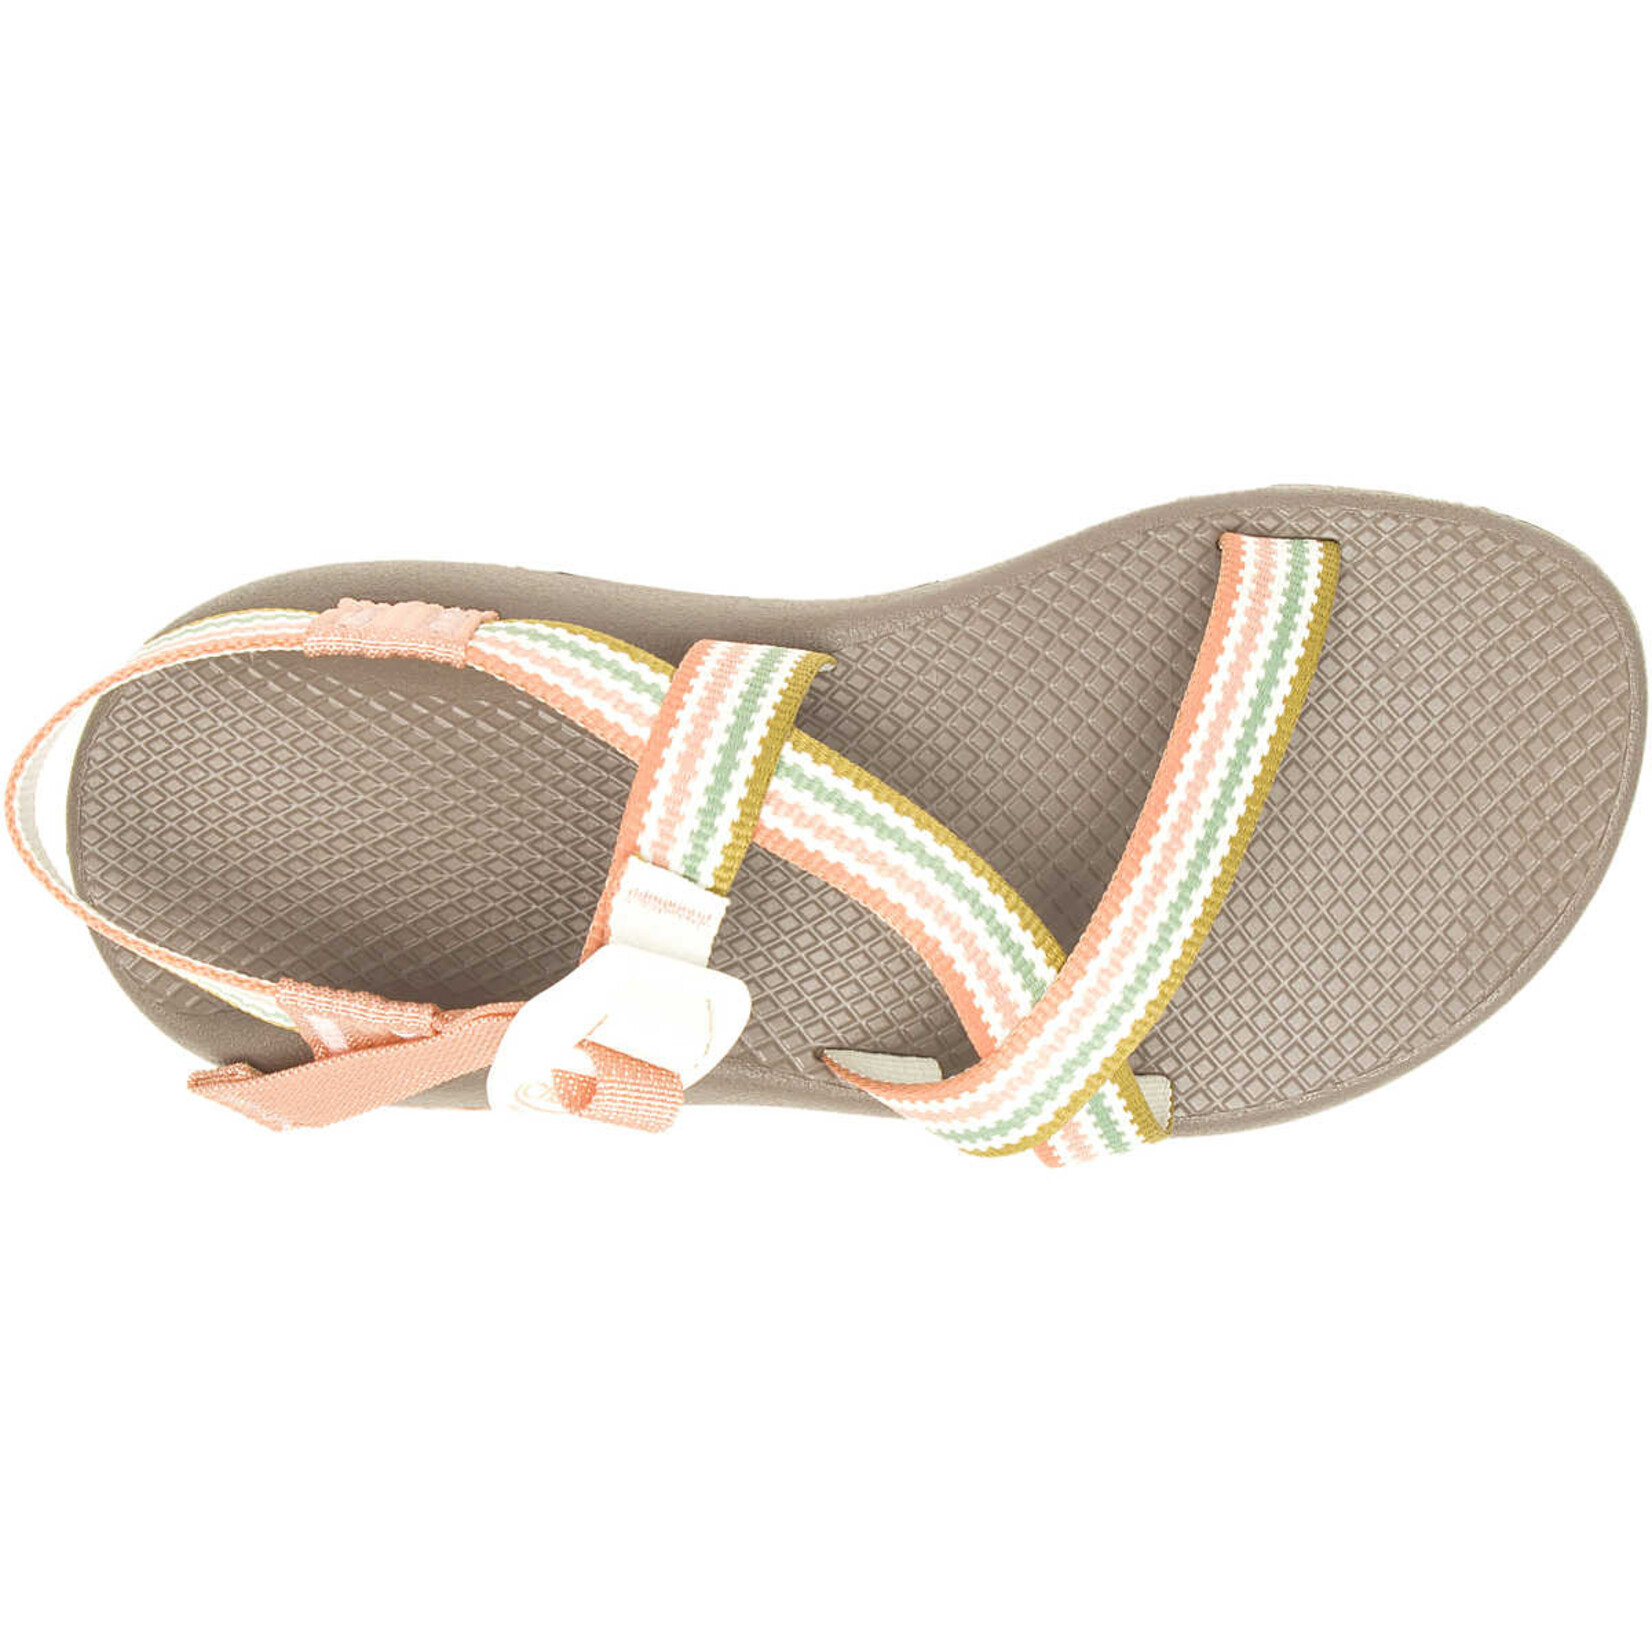 Chaco Chaco Women's Z/1 Classic Sandals